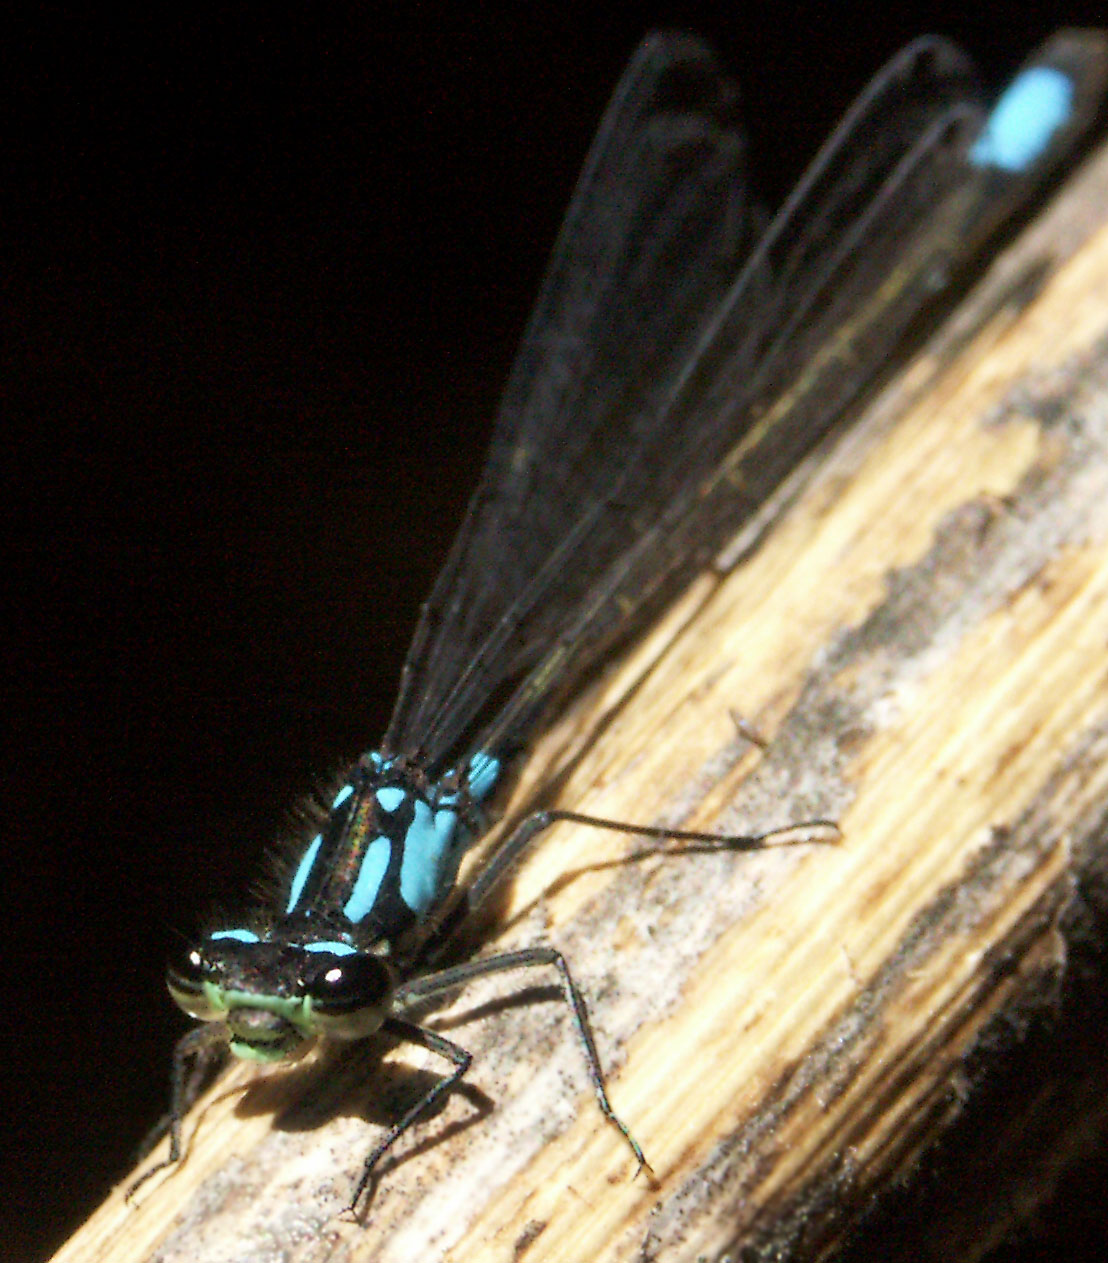 Exclamation Damsel, male